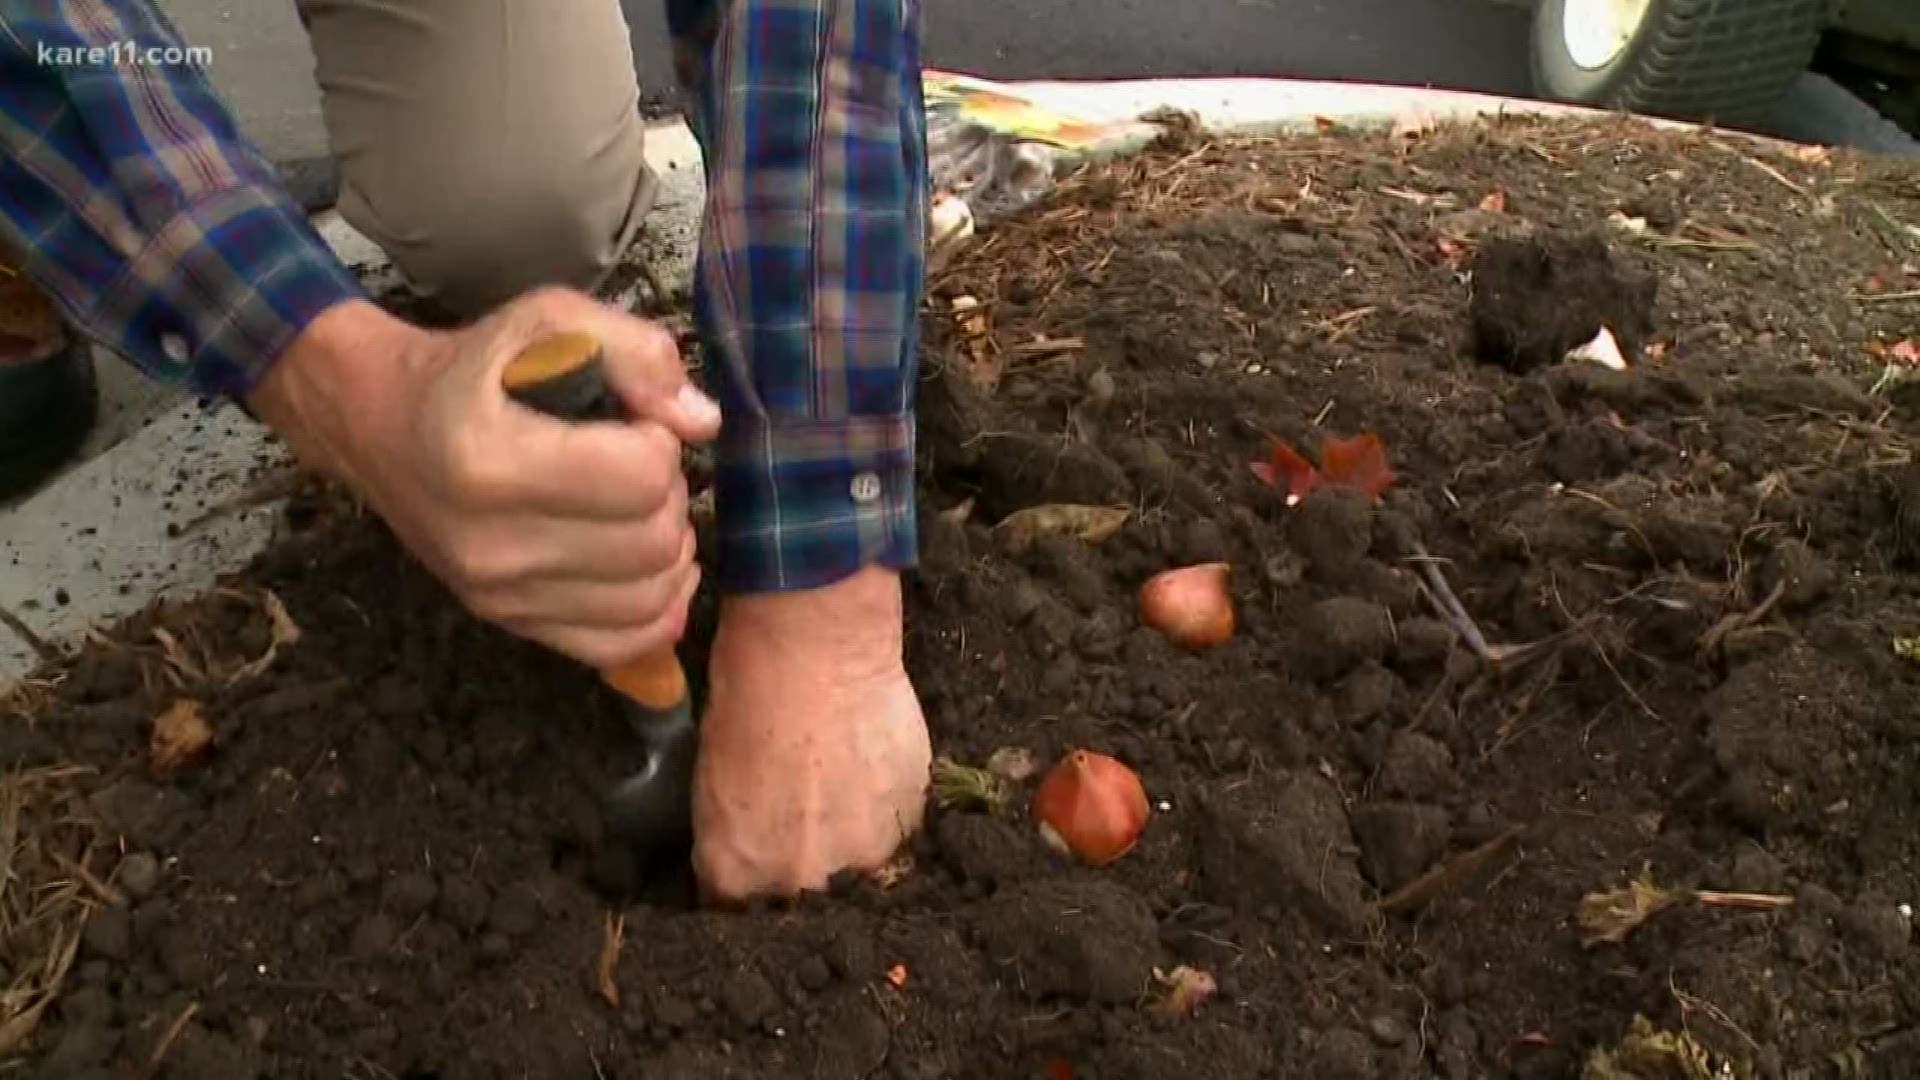 You can ensure spring color by getting spring bulbs in the ground now!